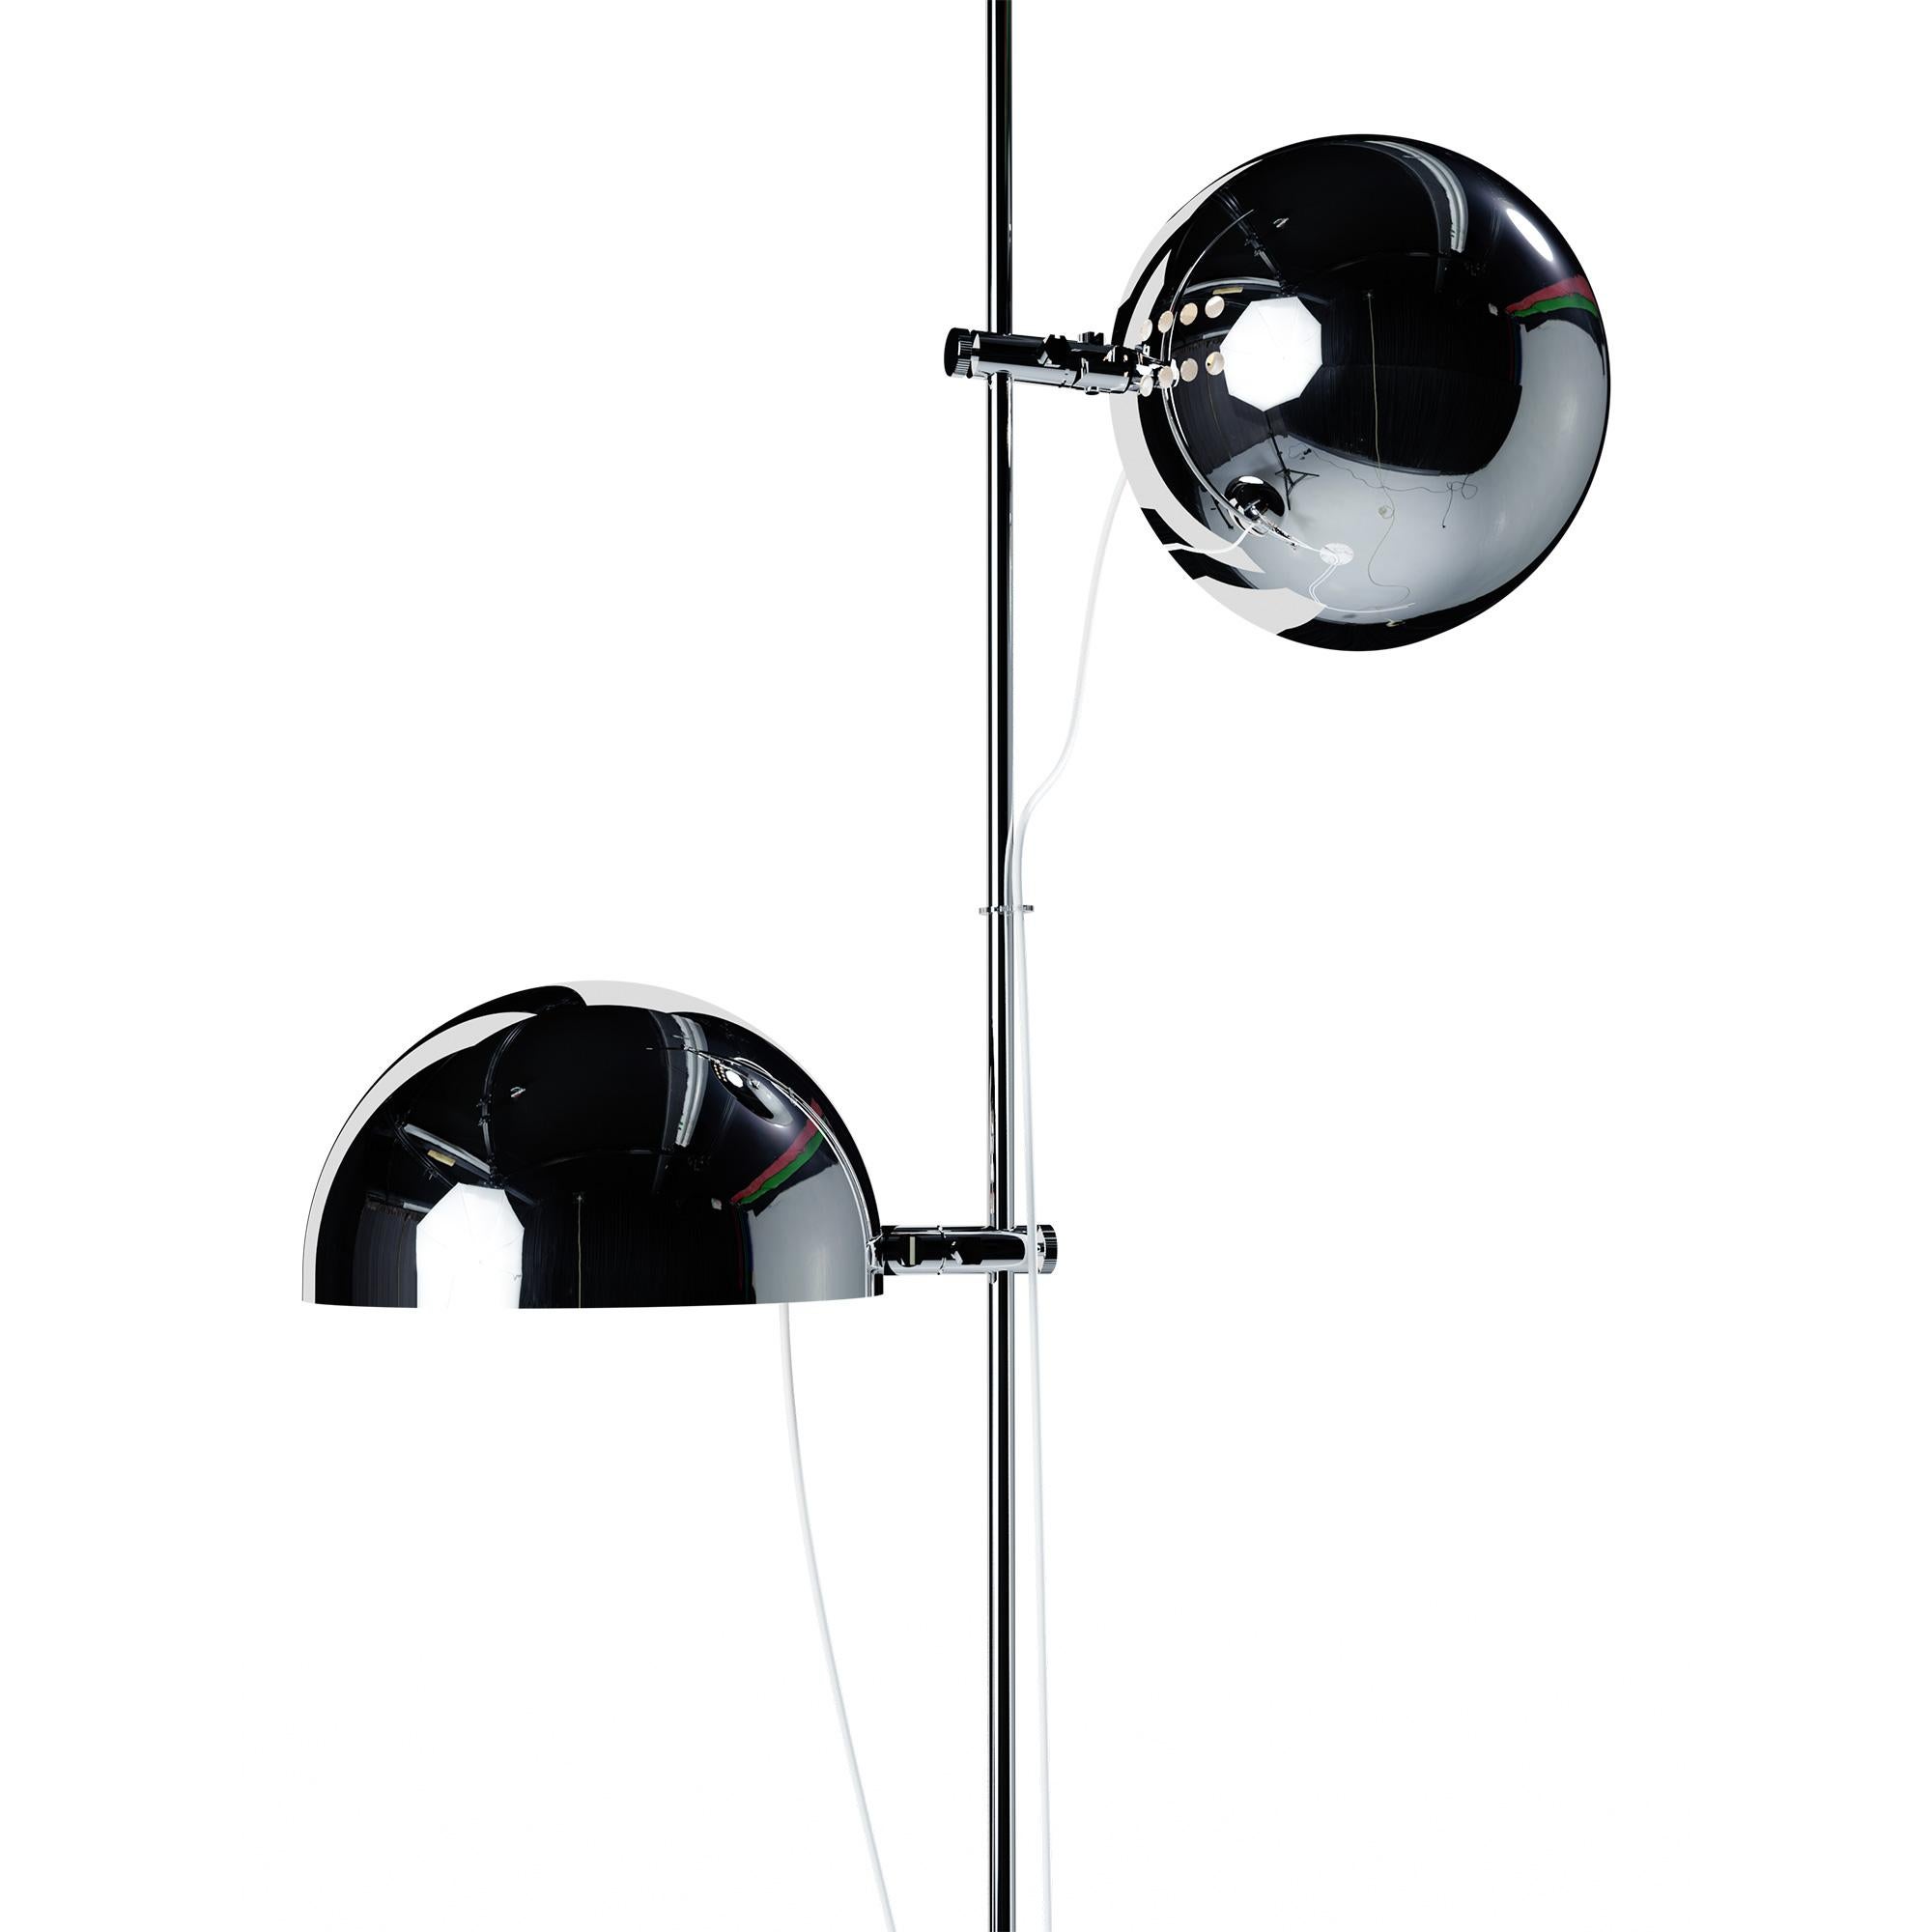 Alain Richard 'A23' floor lamp in Chrome for Disderot.

Executed in chromed metal with a marble base, this newly produced numbered edition with included certificate of authenticity is made in France by Disderot with many of the same small-scale